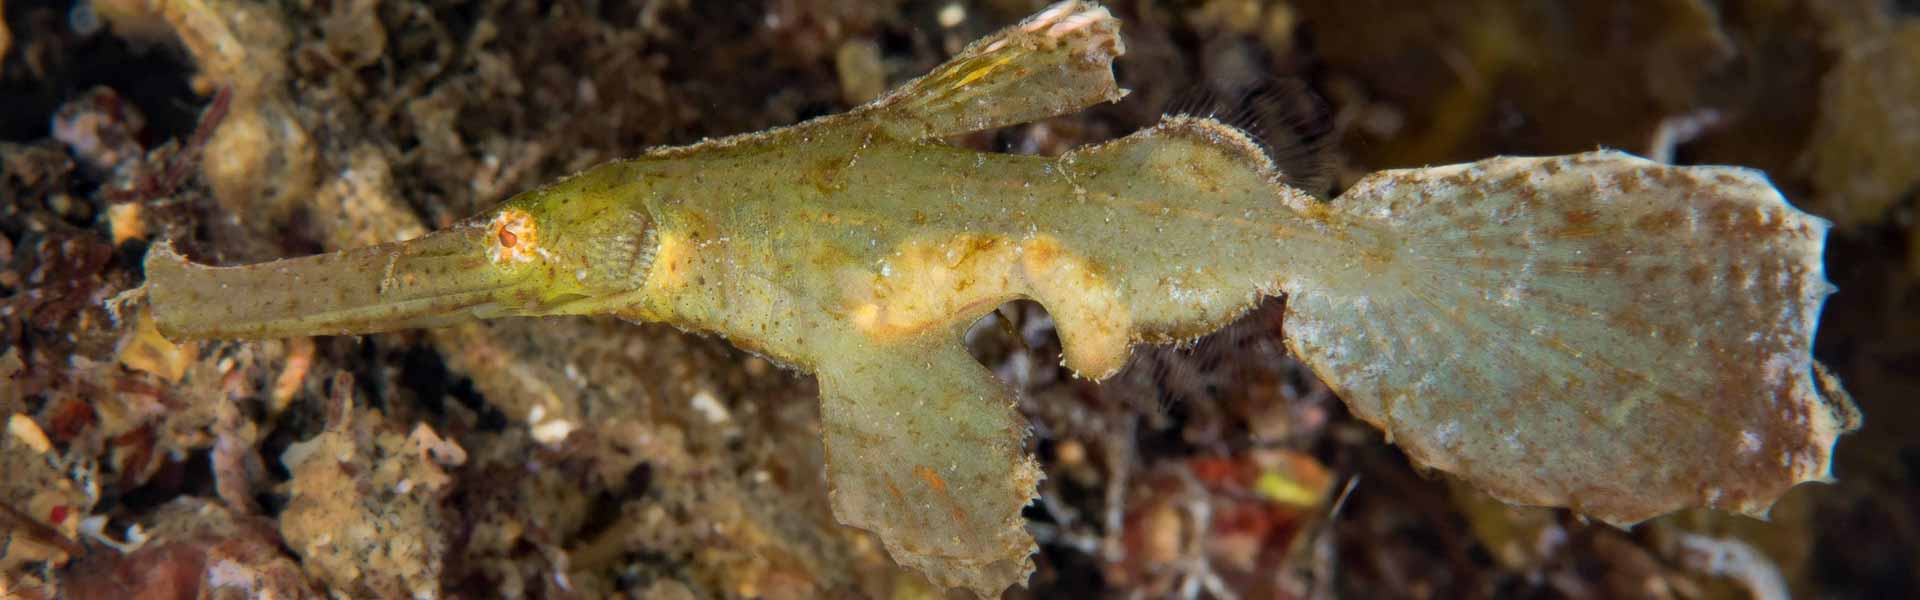 The Robust Ghost Pipefish